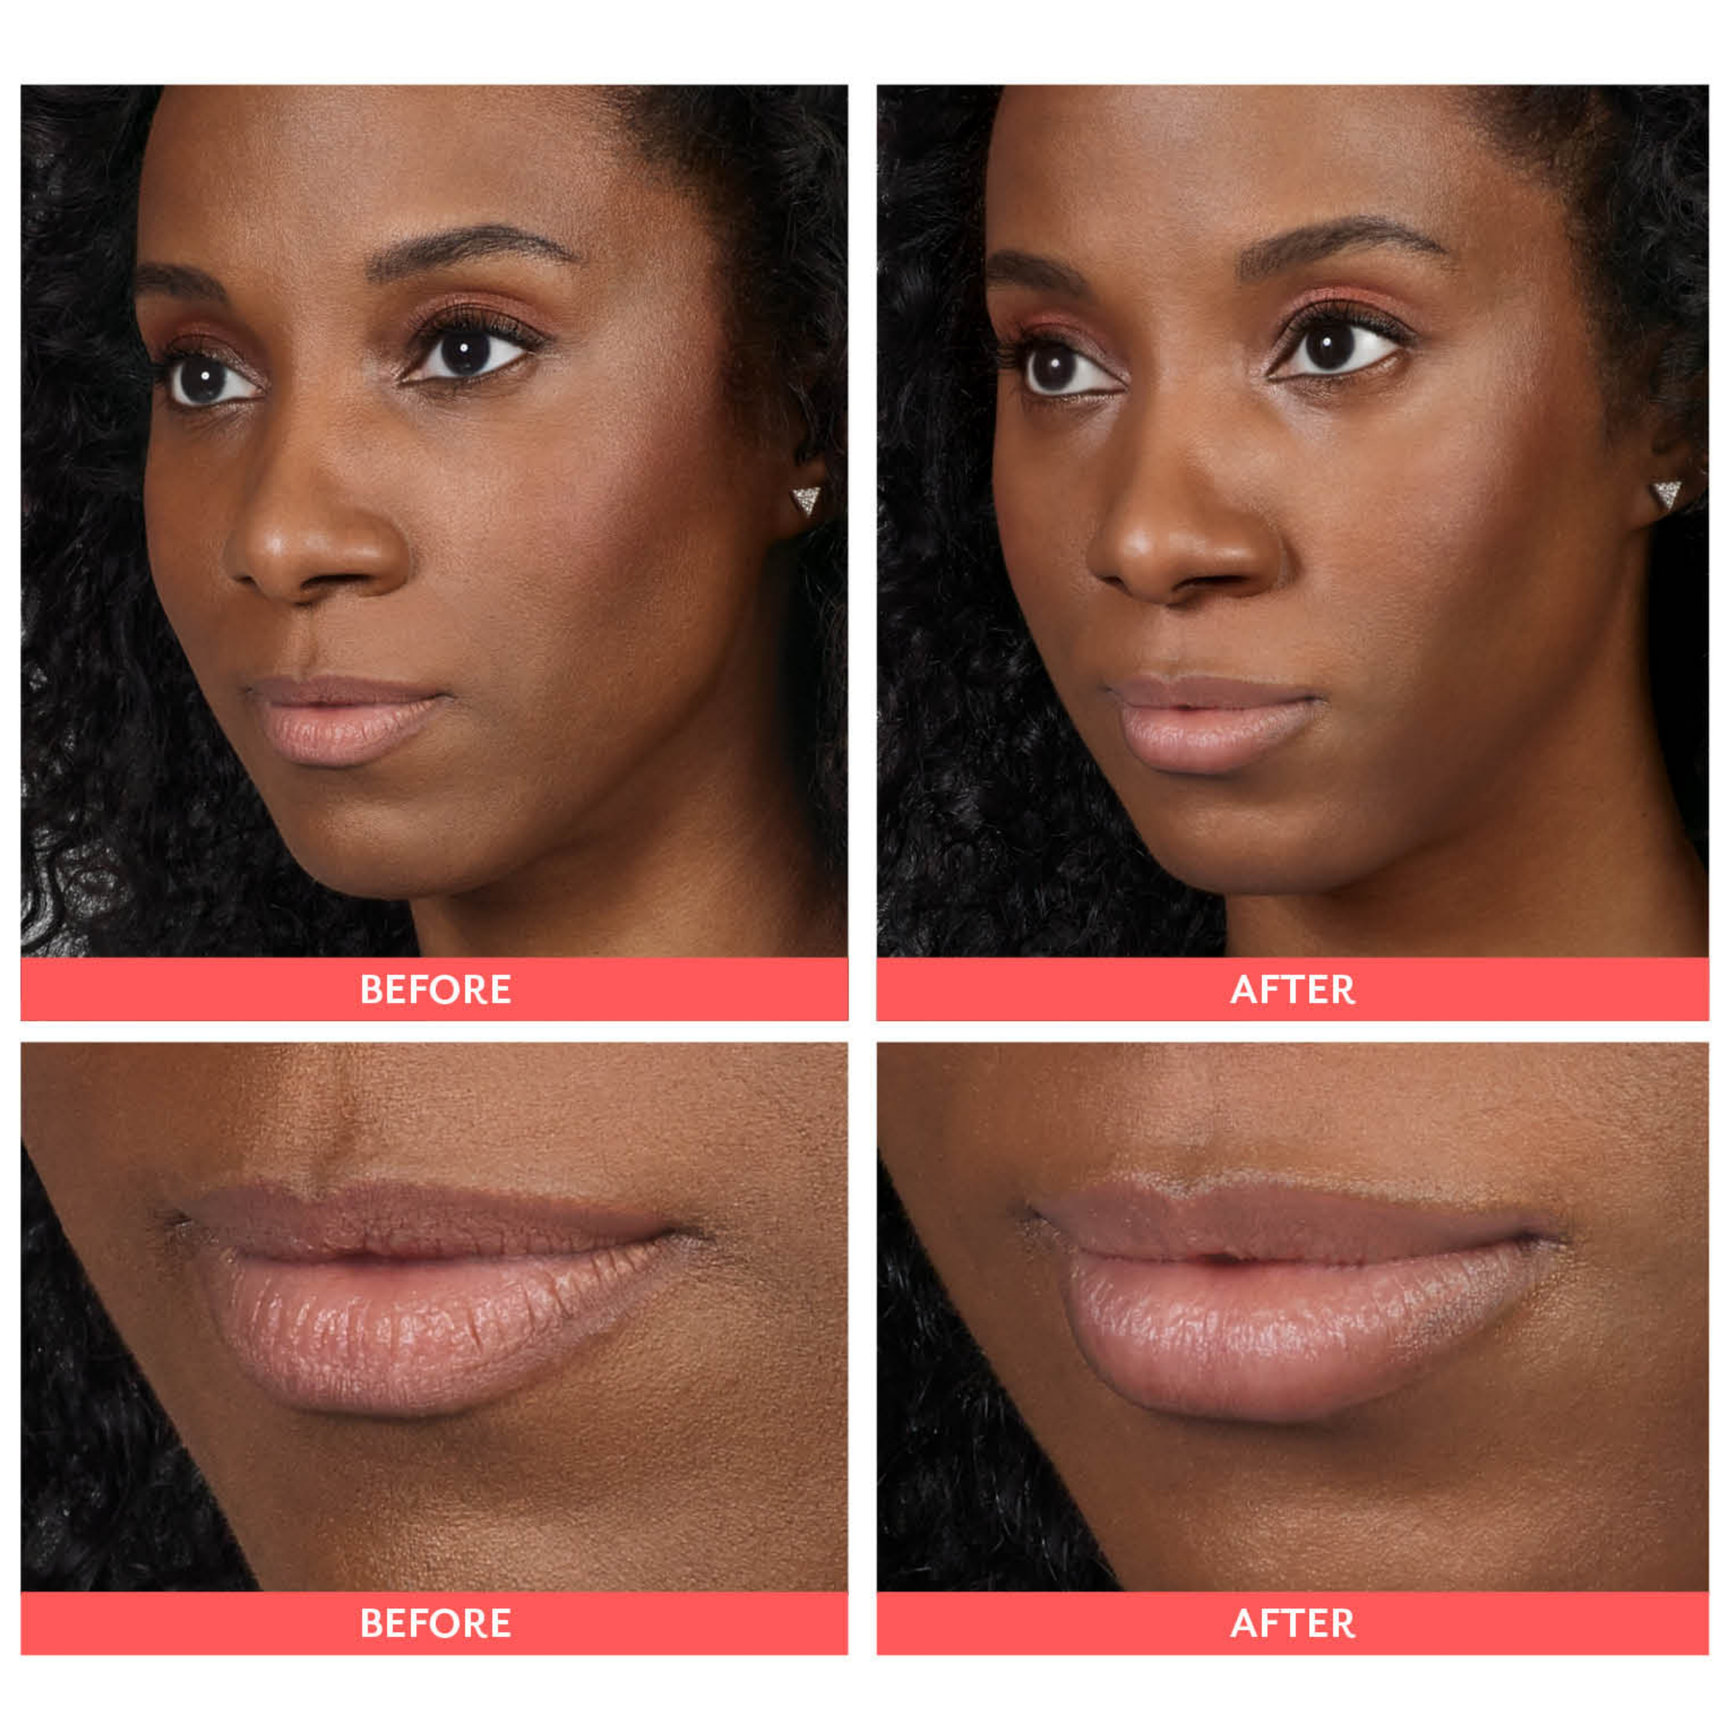 Lip Filler Before and After Feel Ideal 360 Med Spa Southlake, TX